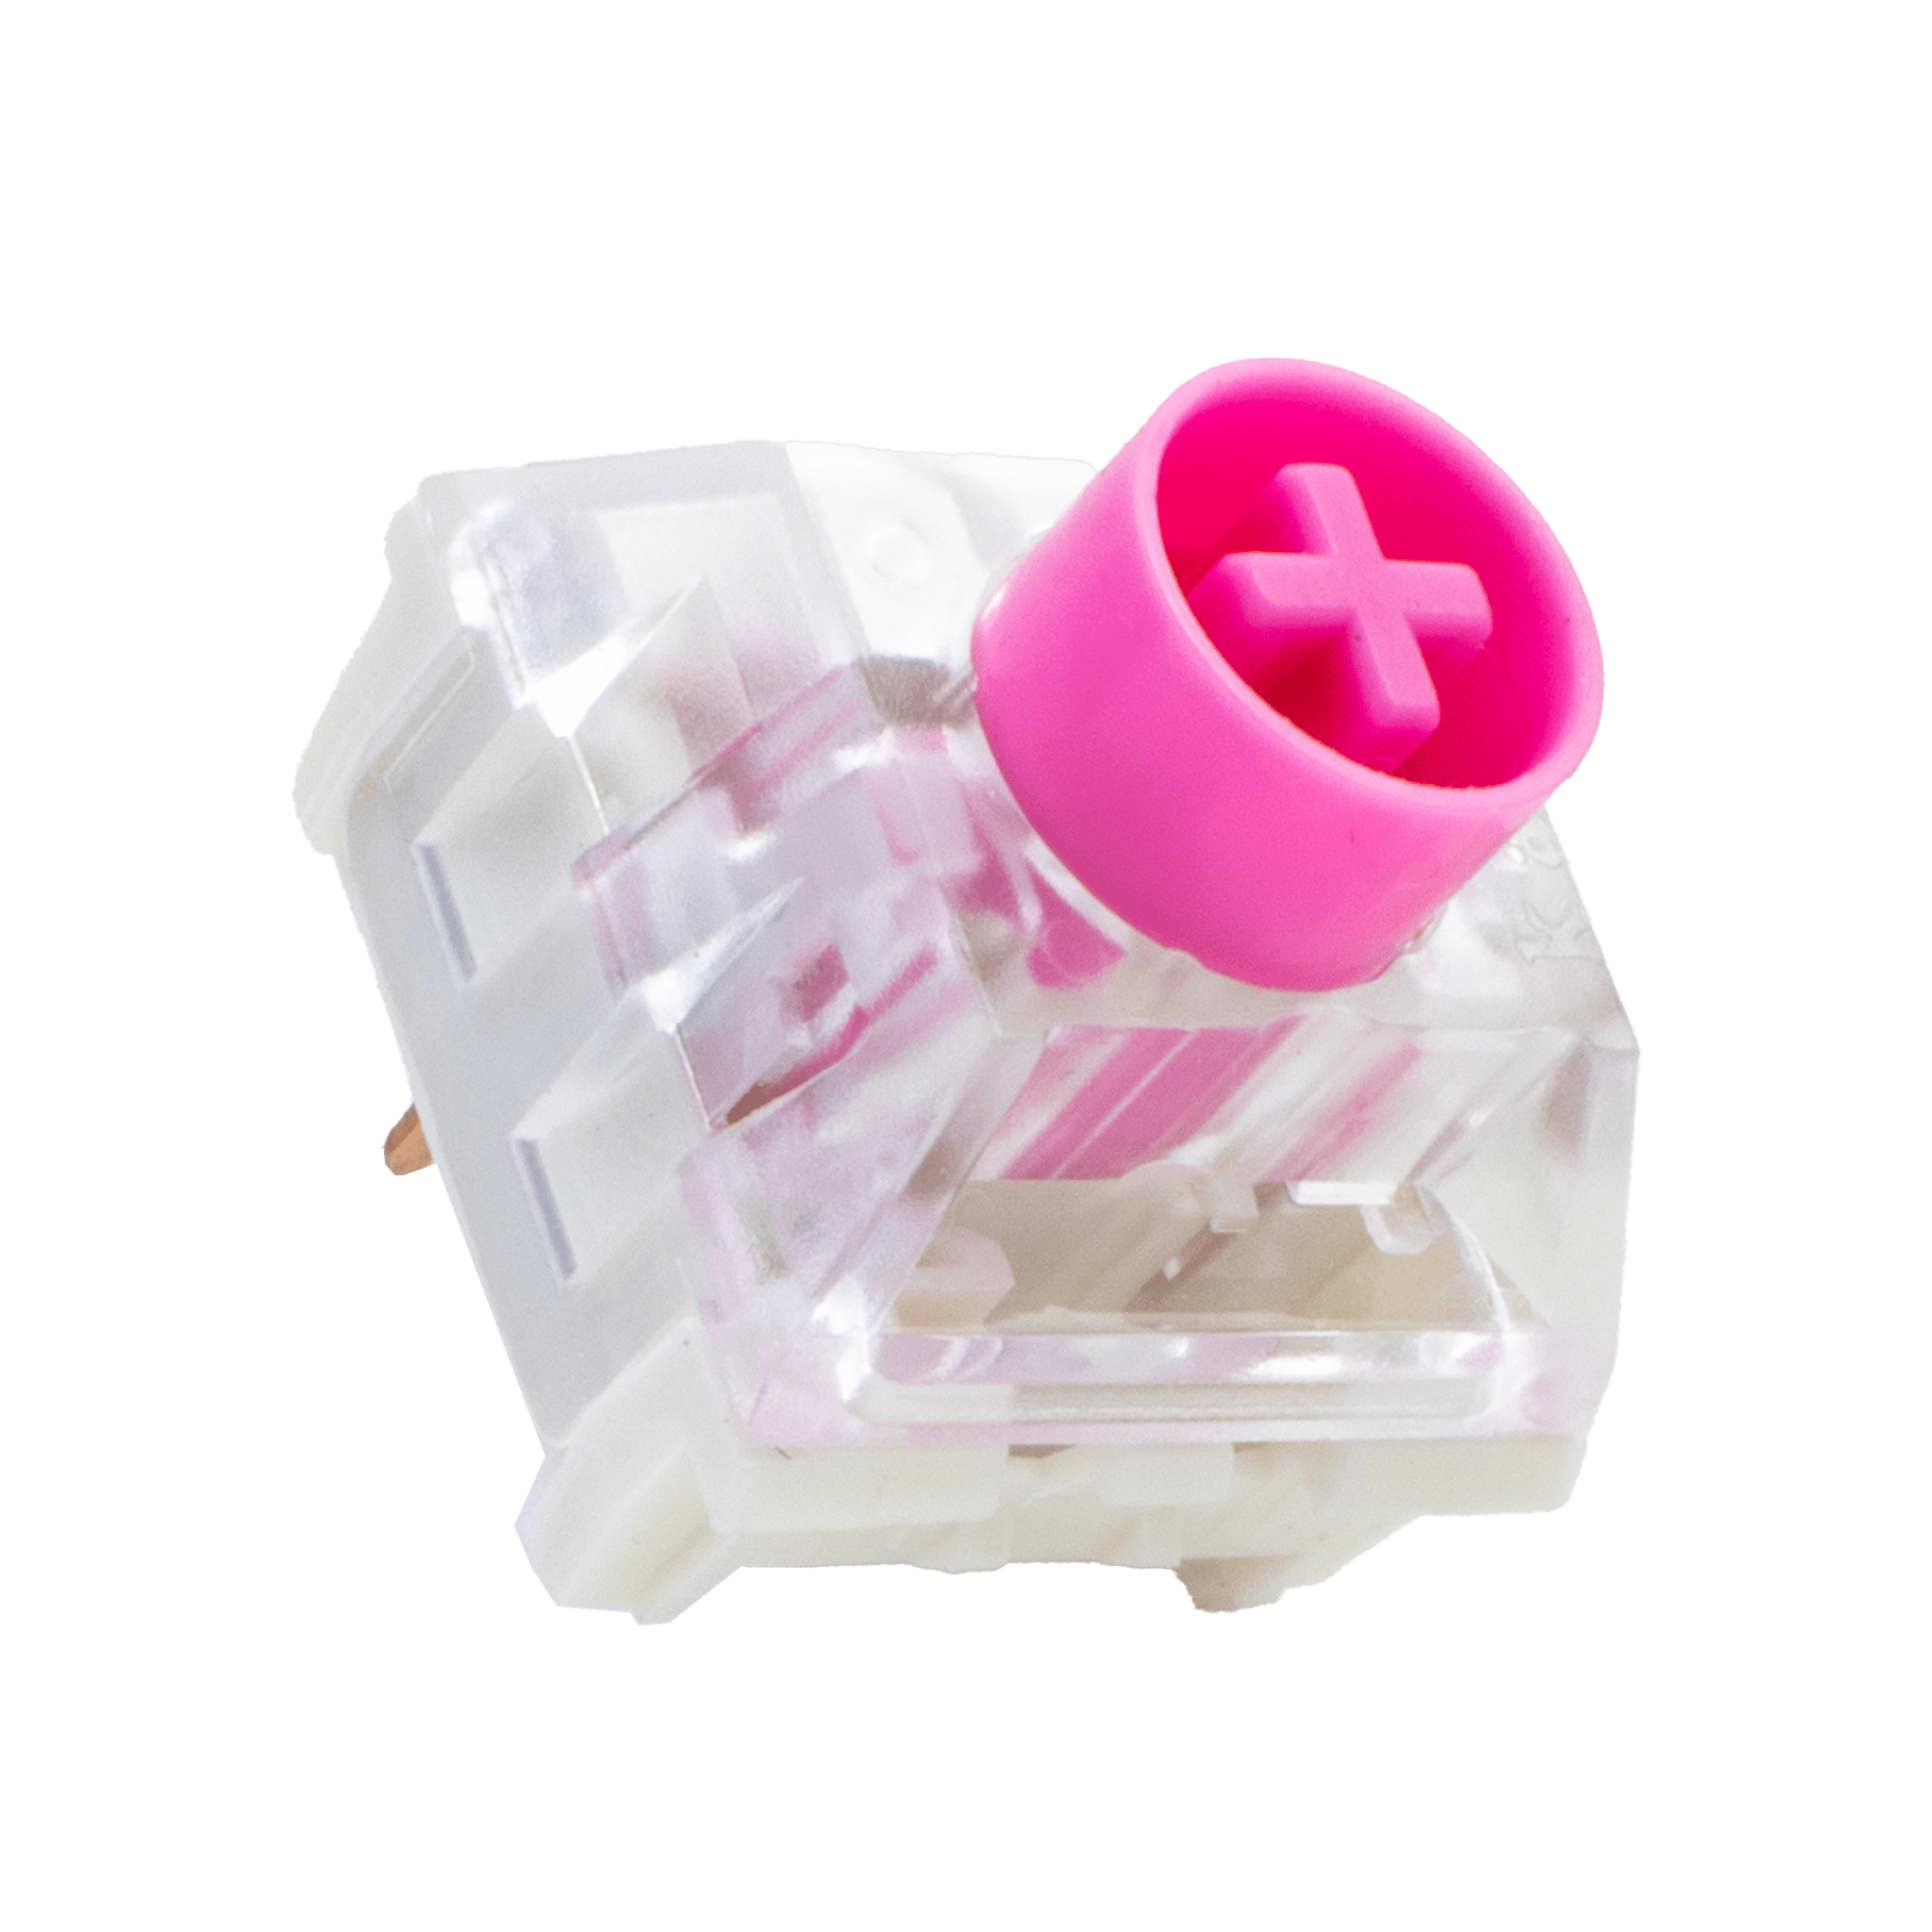 Kailh Box Silent Pink - Mechboards